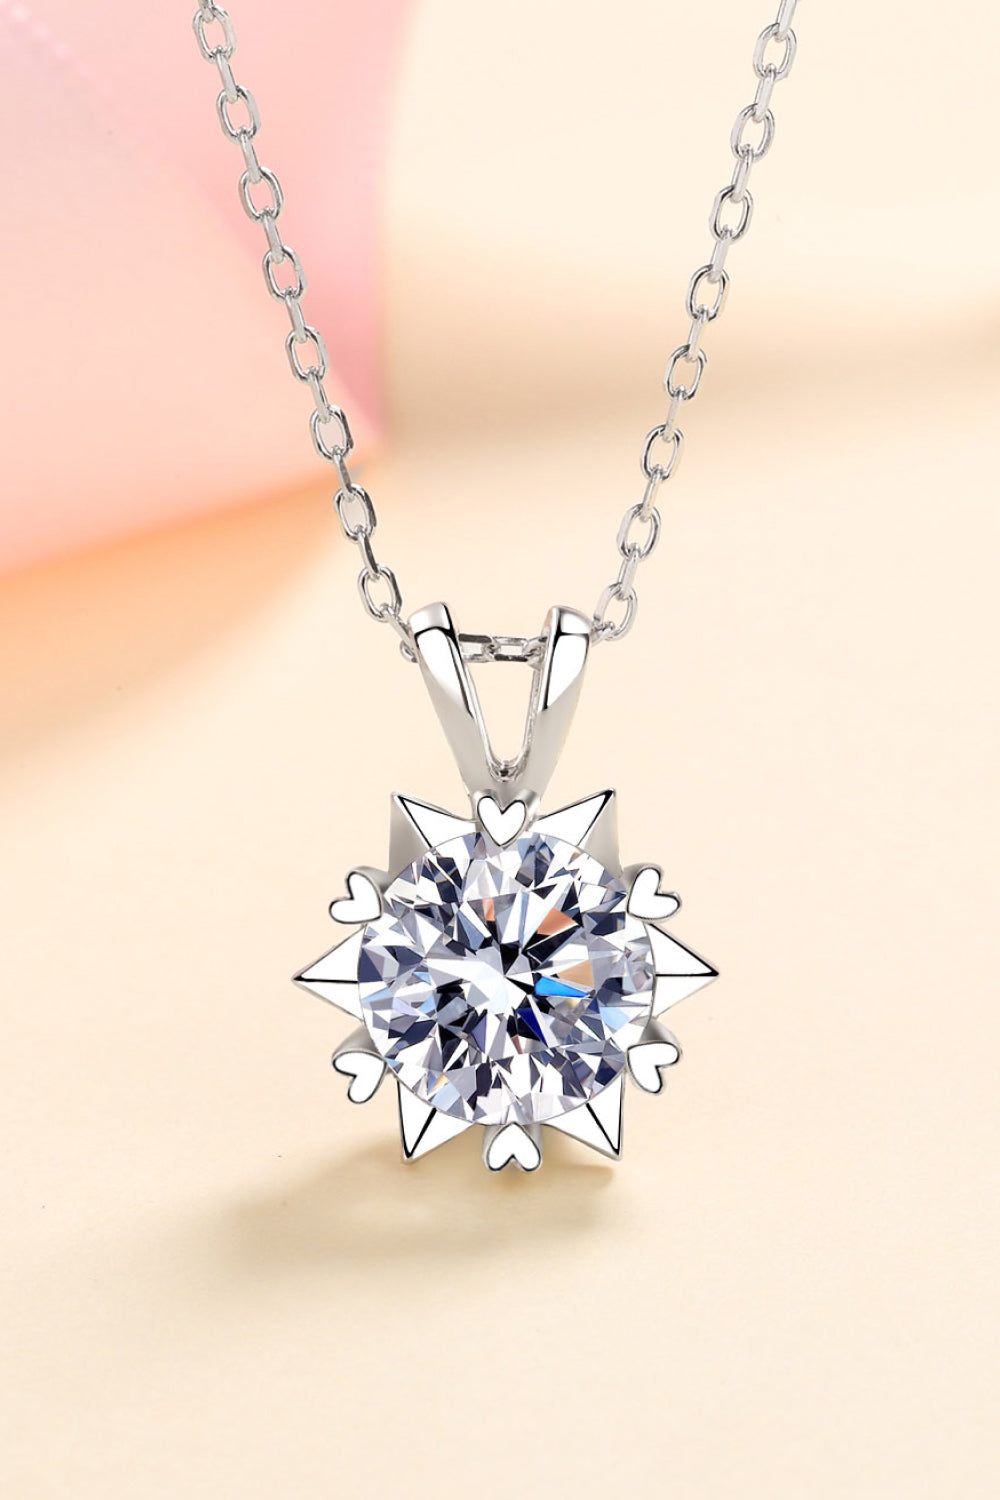 Learning To Love 925 Sterling Silver Moissanite Pendant Necklace - Sharon David's